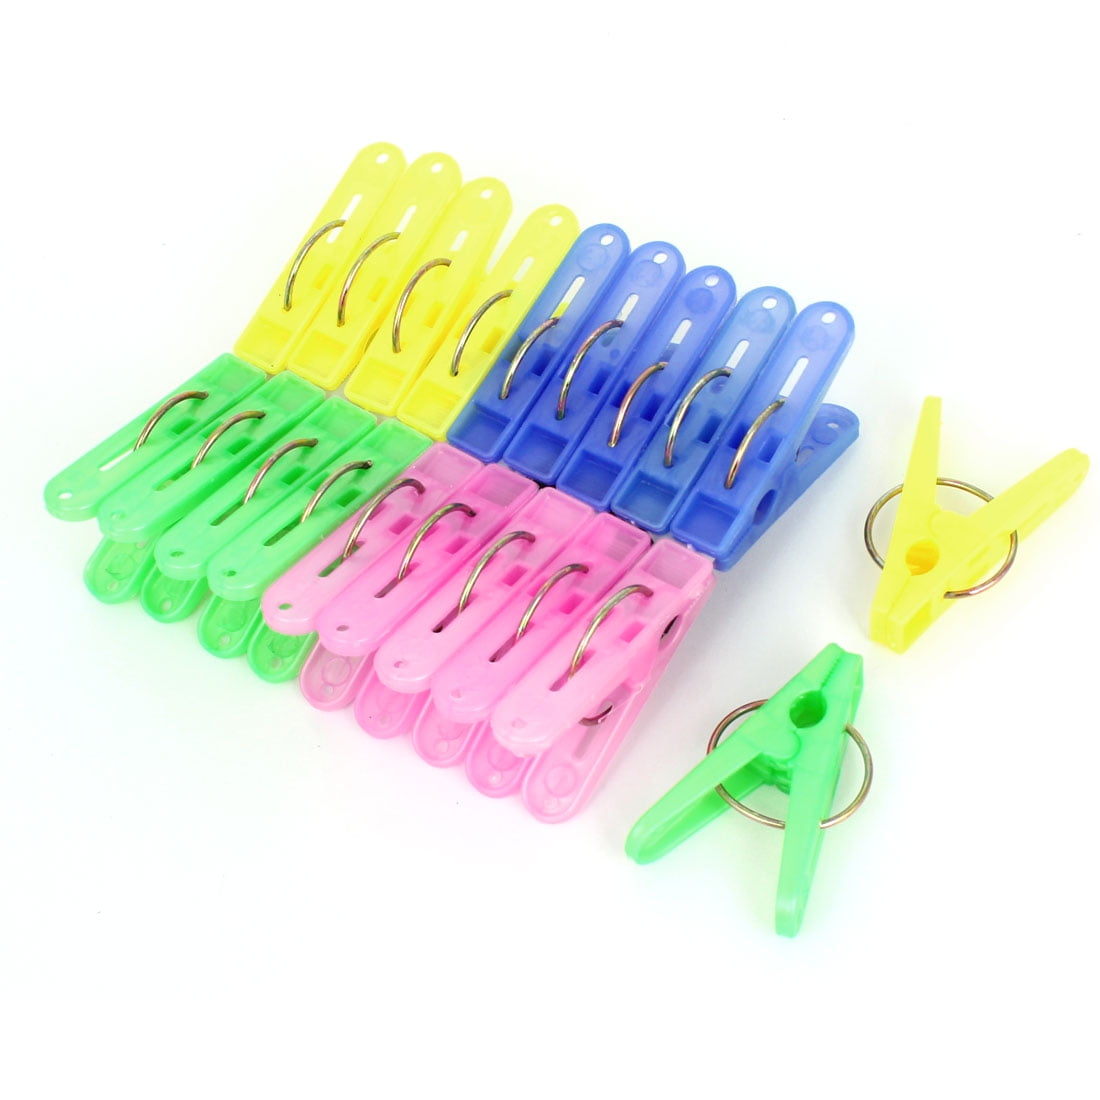 Aliotech 20pcs Vinyl Plastic Coated Metal Clothespins Clips Multi-Function  Colored Utility Steel Wire Clips Pegs Holders in Basket Bin for Clothes